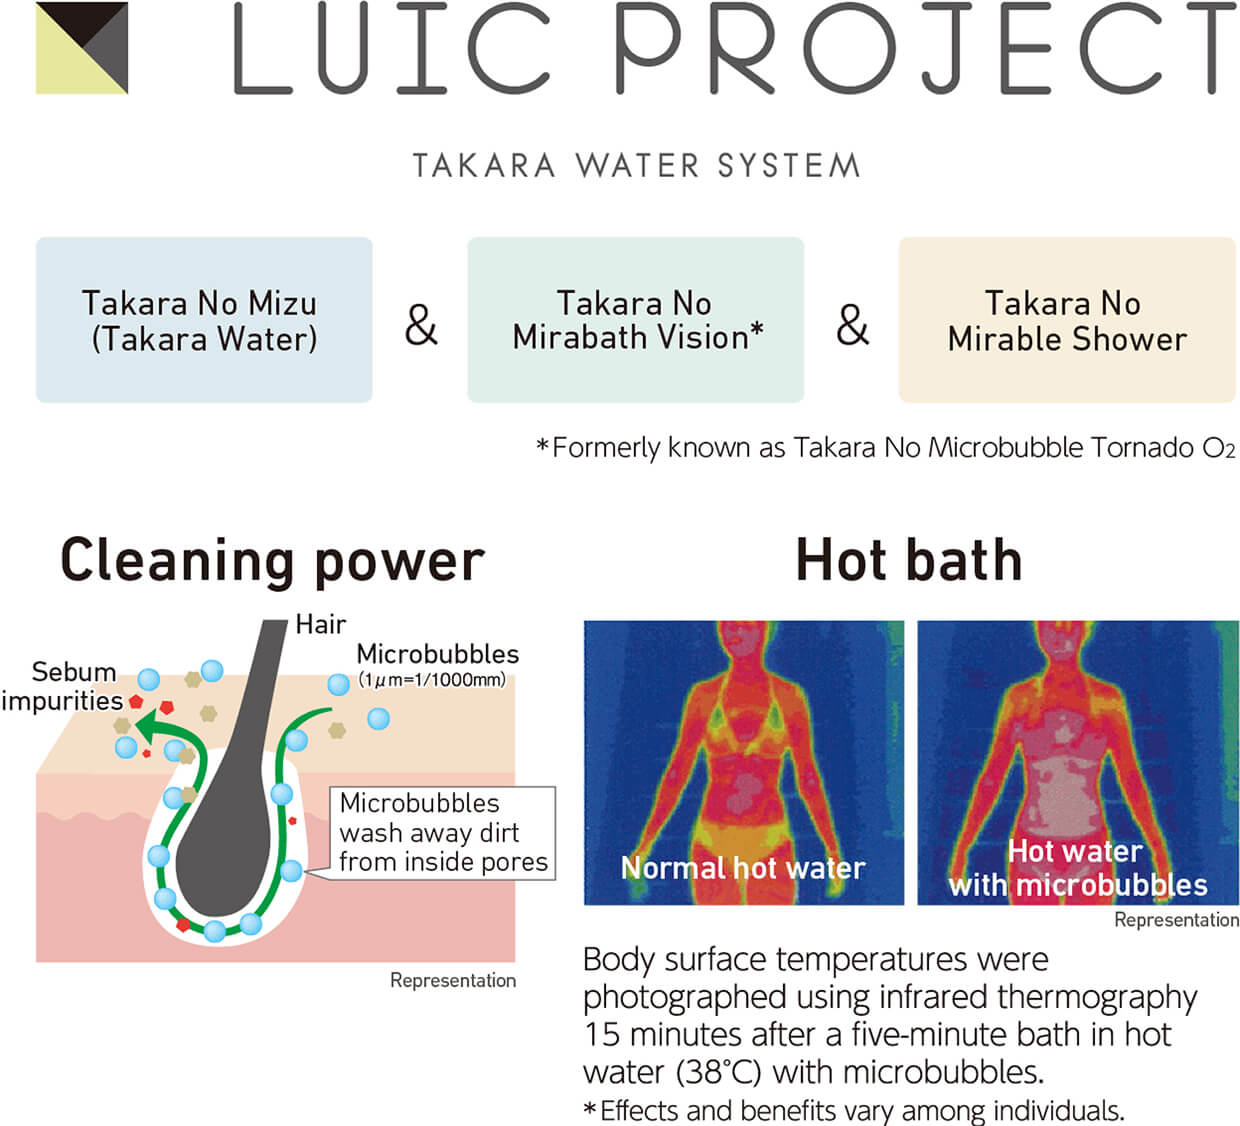 LUIC PROJECT